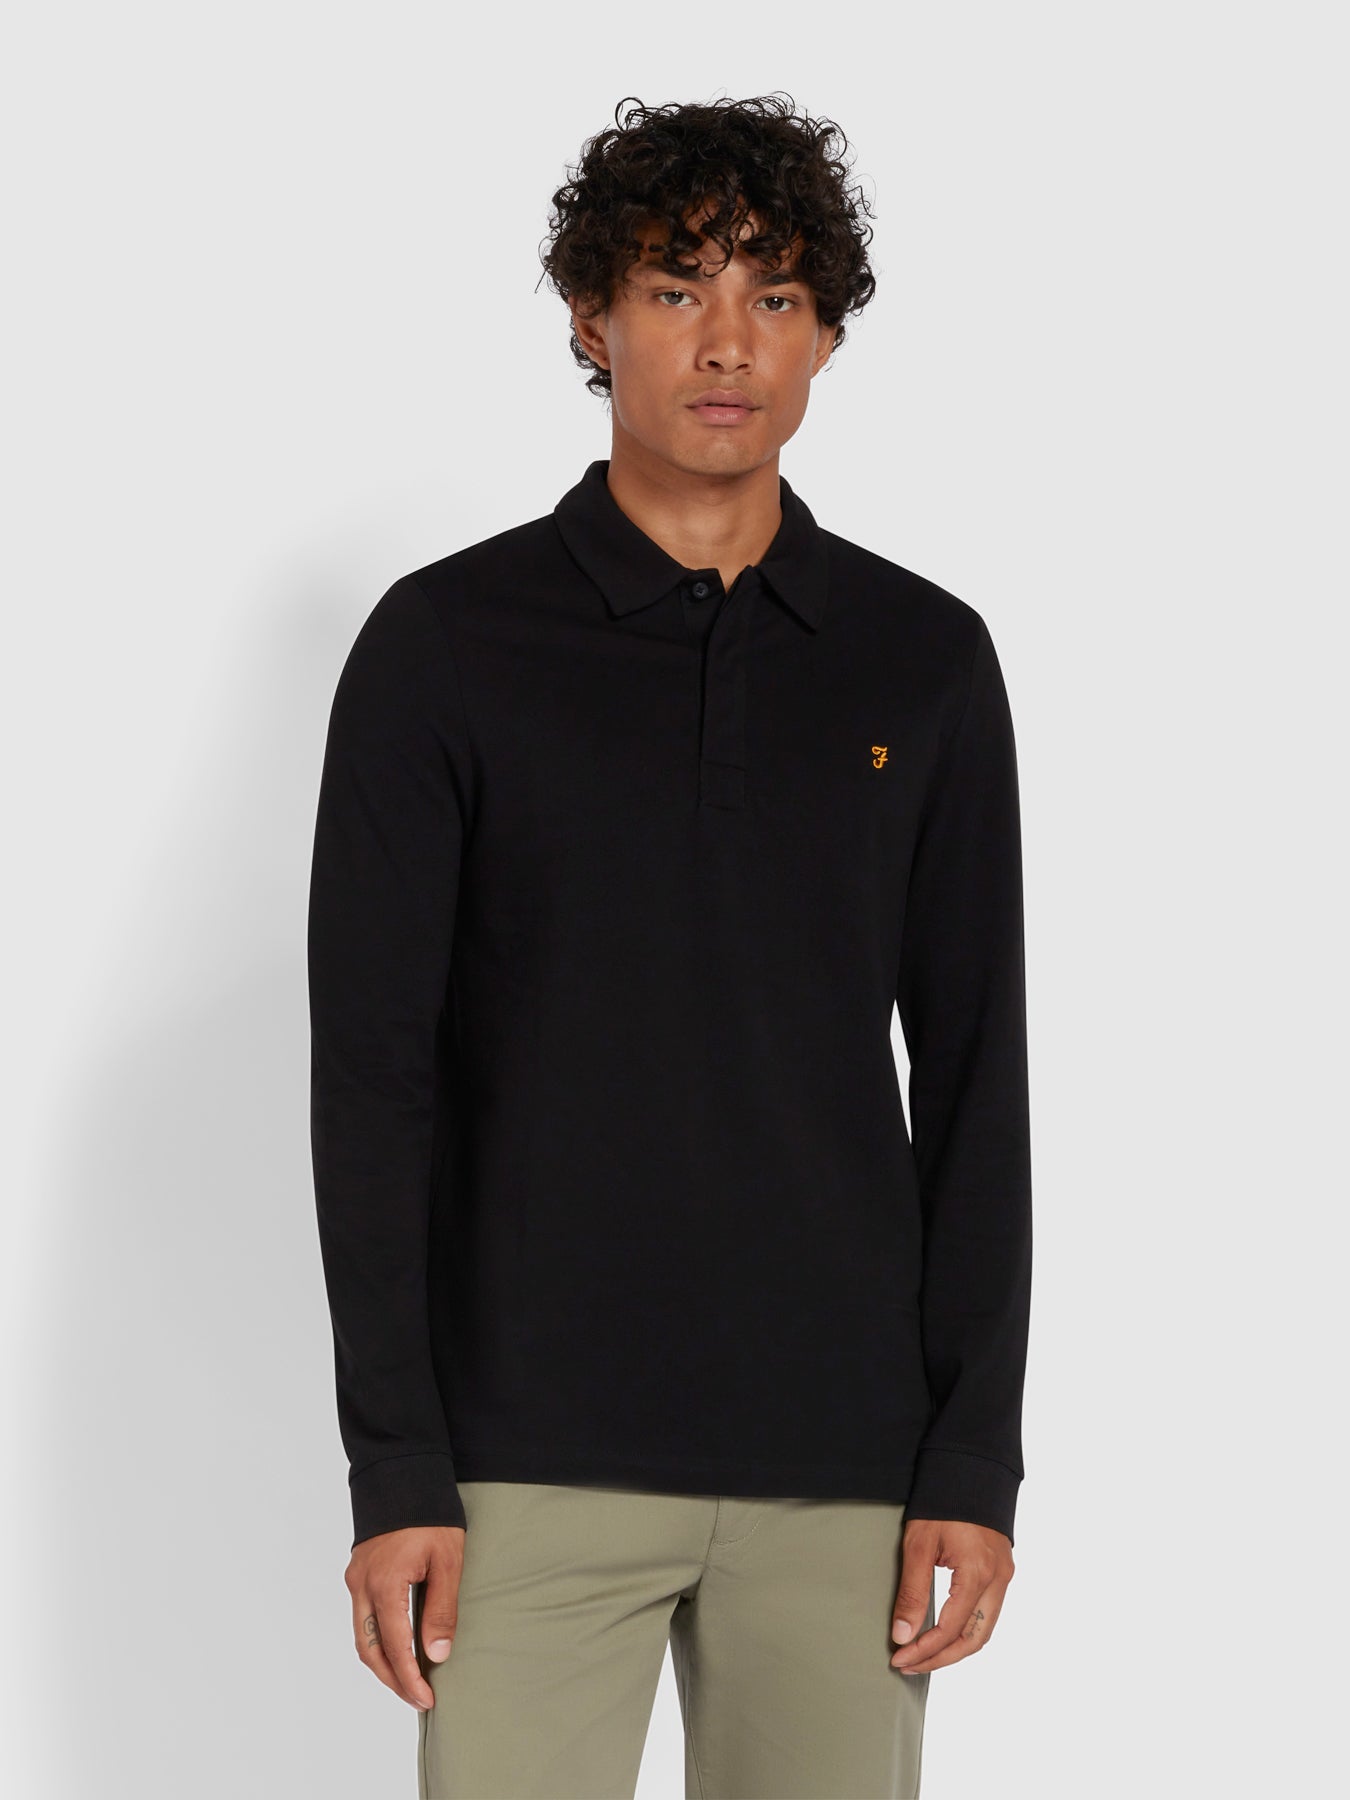 View Haslam Slim Fit Long Sleeve Organic Cotton Polo Shirt In Black information